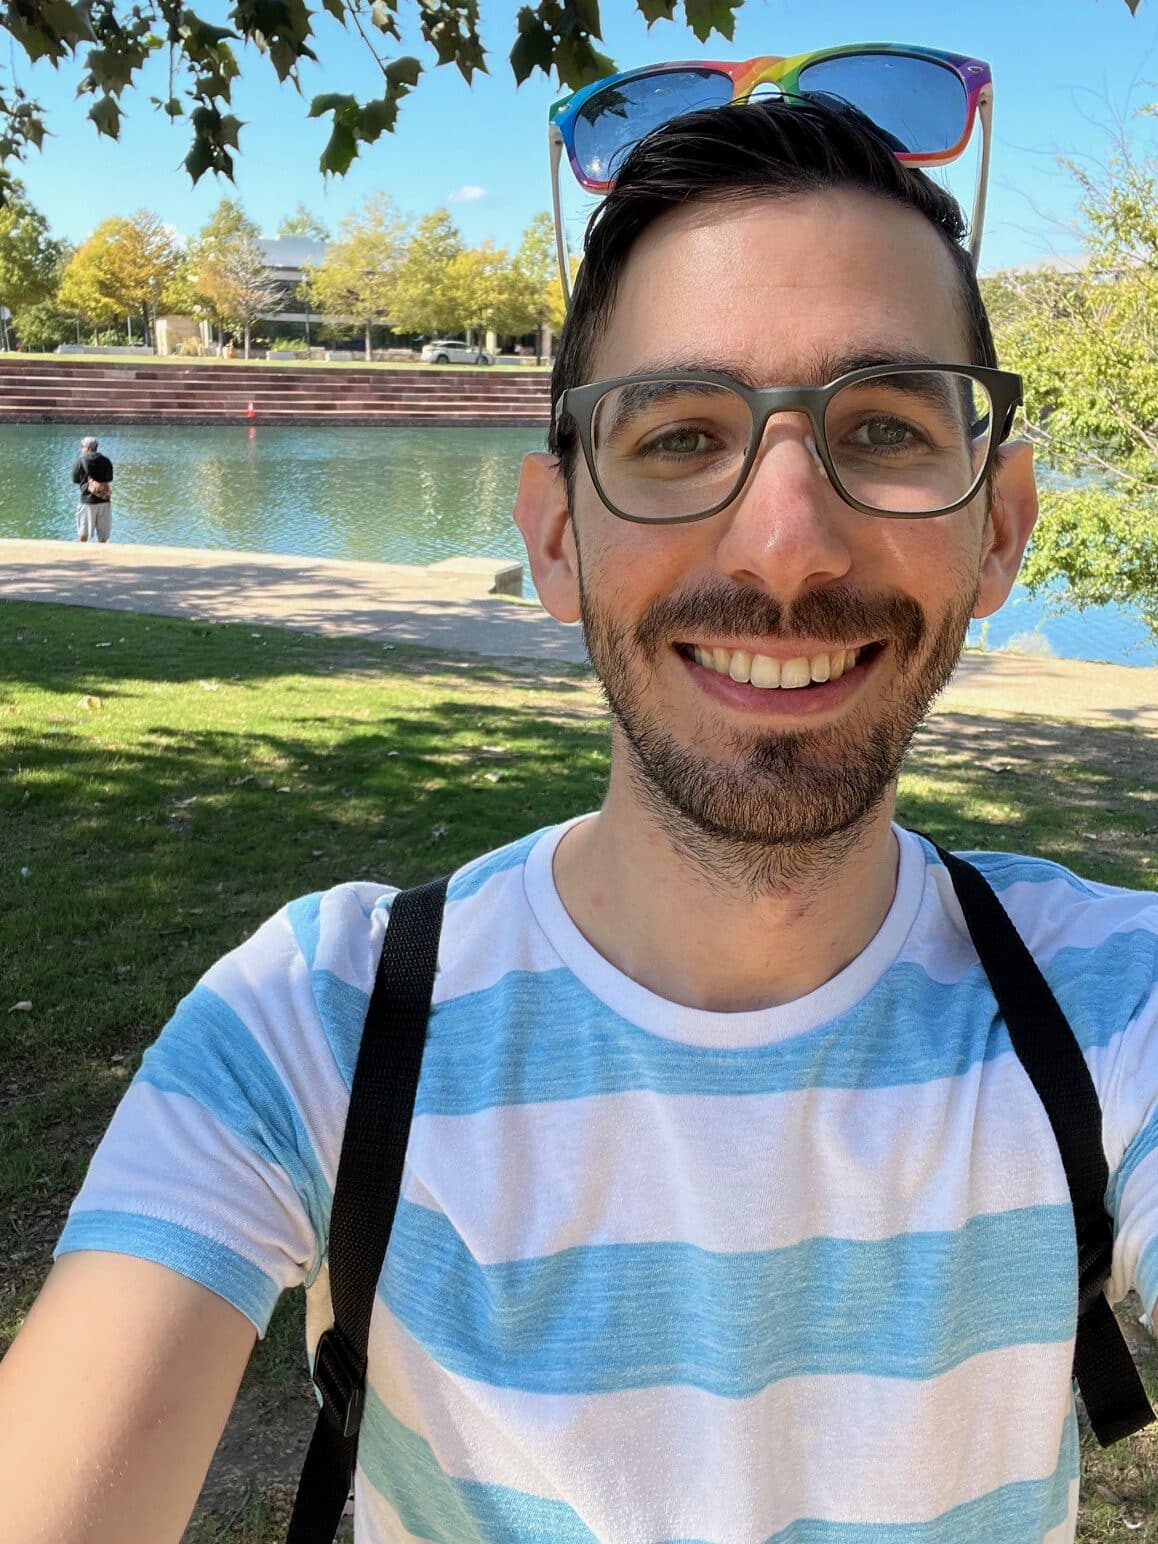 Nathan takes a selfie in front of a pond.